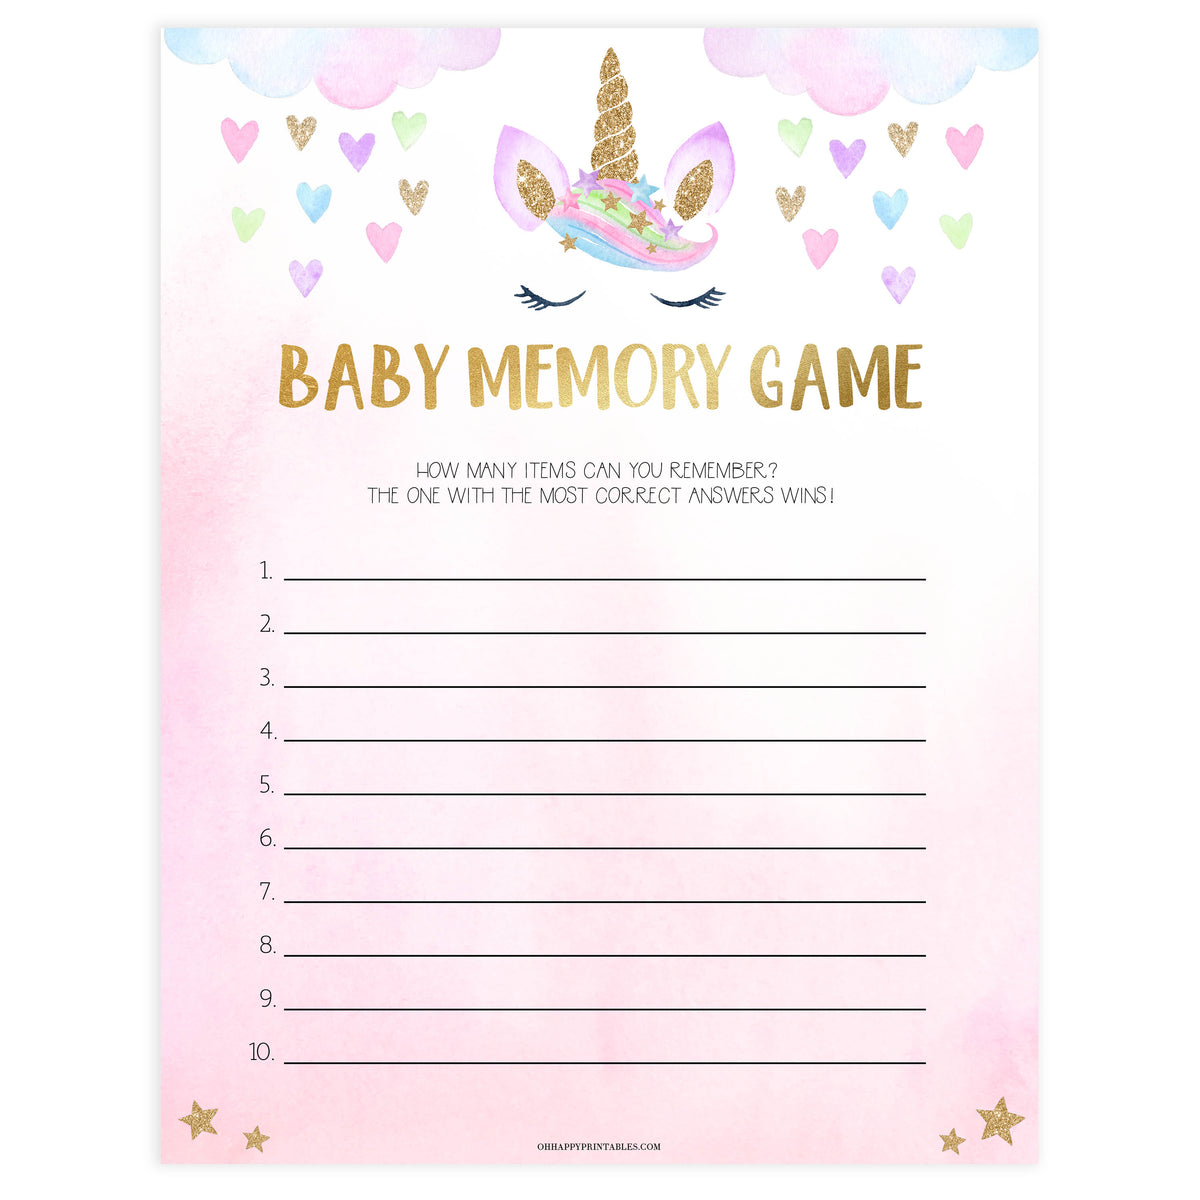 baby memory game, Printable baby shower games, unicorn baby games, baby shower games, fun baby shower ideas, top baby shower ideas, unicorn baby shower, baby shower games, fun unicorn baby shower ideas